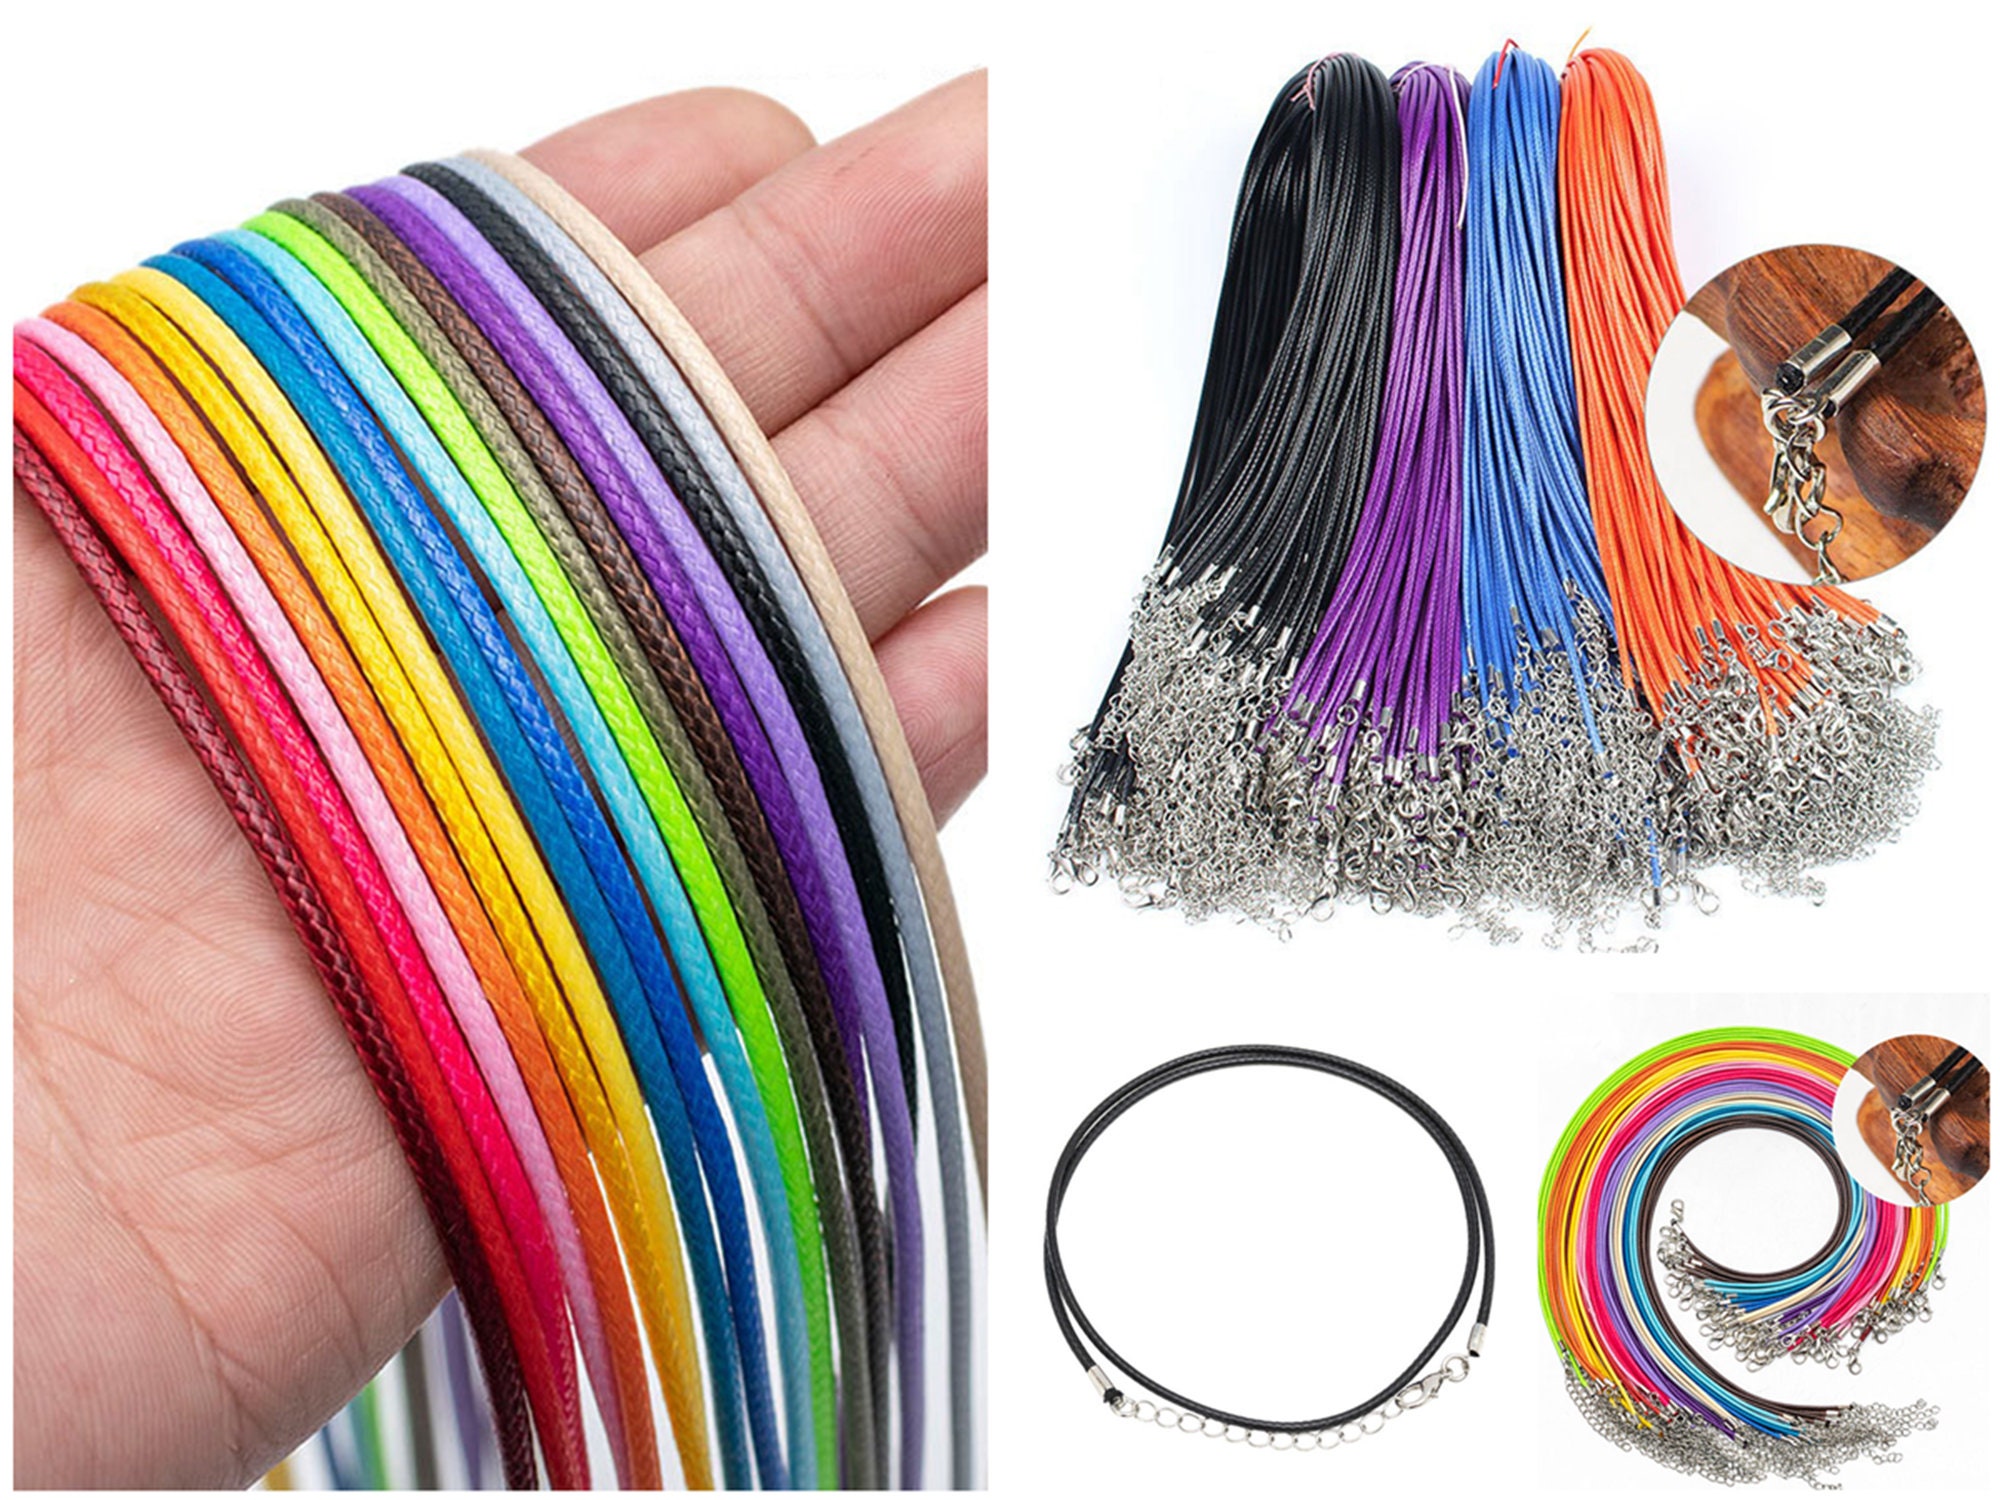 50Pcs/lot 1.5/2mm Leather Necklace Cord With Lobster Clasp Wax Rope Chain  For DIY Necklaces Pendant Wax Cord Jewelry Findings